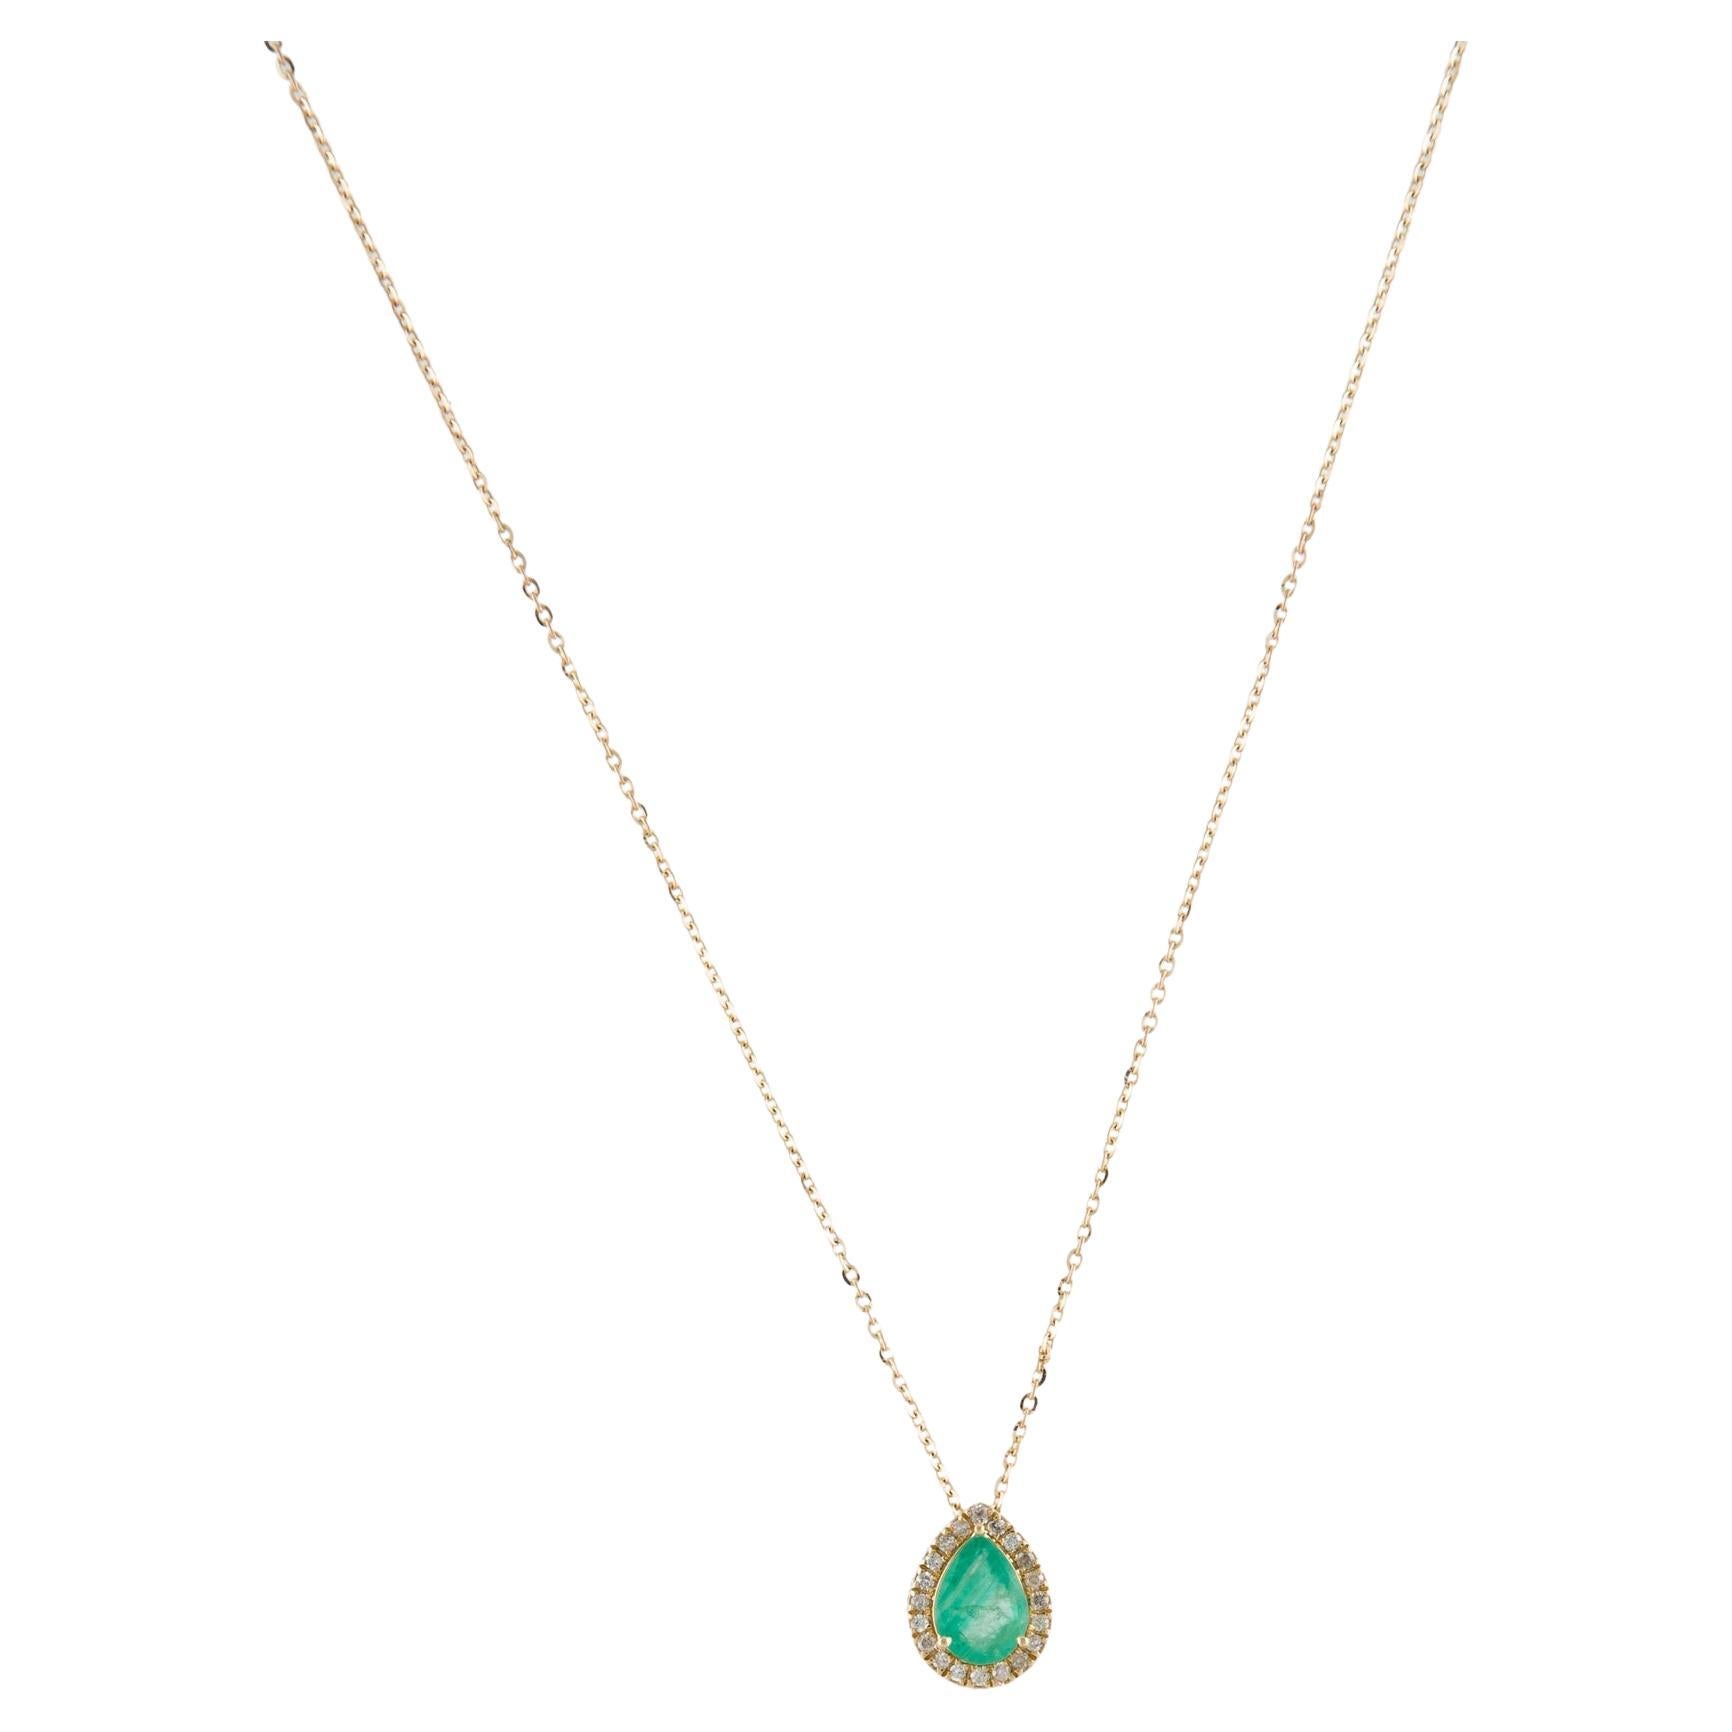 14K Emerald & Diamond Pendant Necklace - Exquisite Jewelry for Timeless Elegance